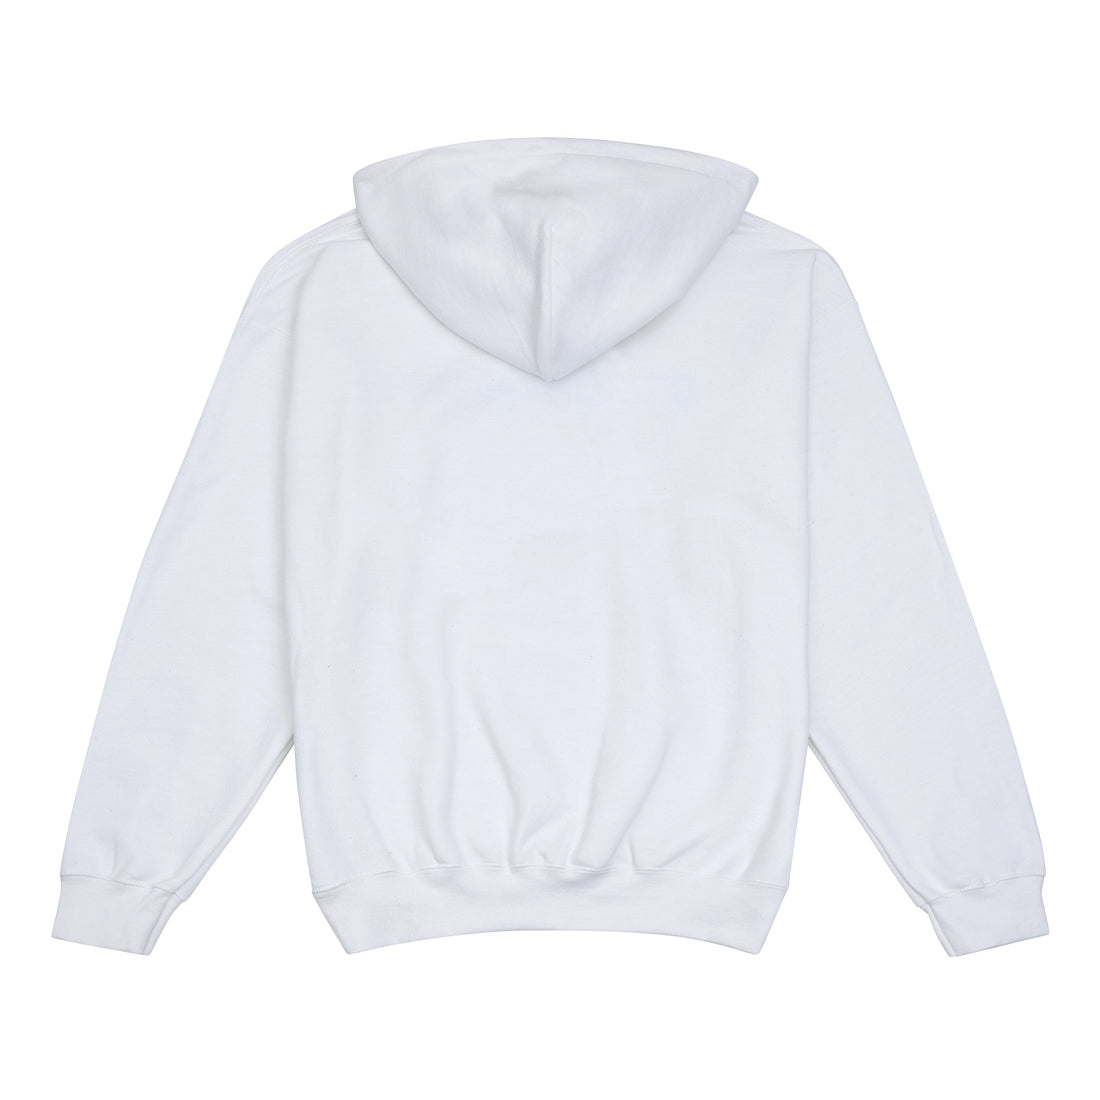 OnlyFans Logo Hoodie - White